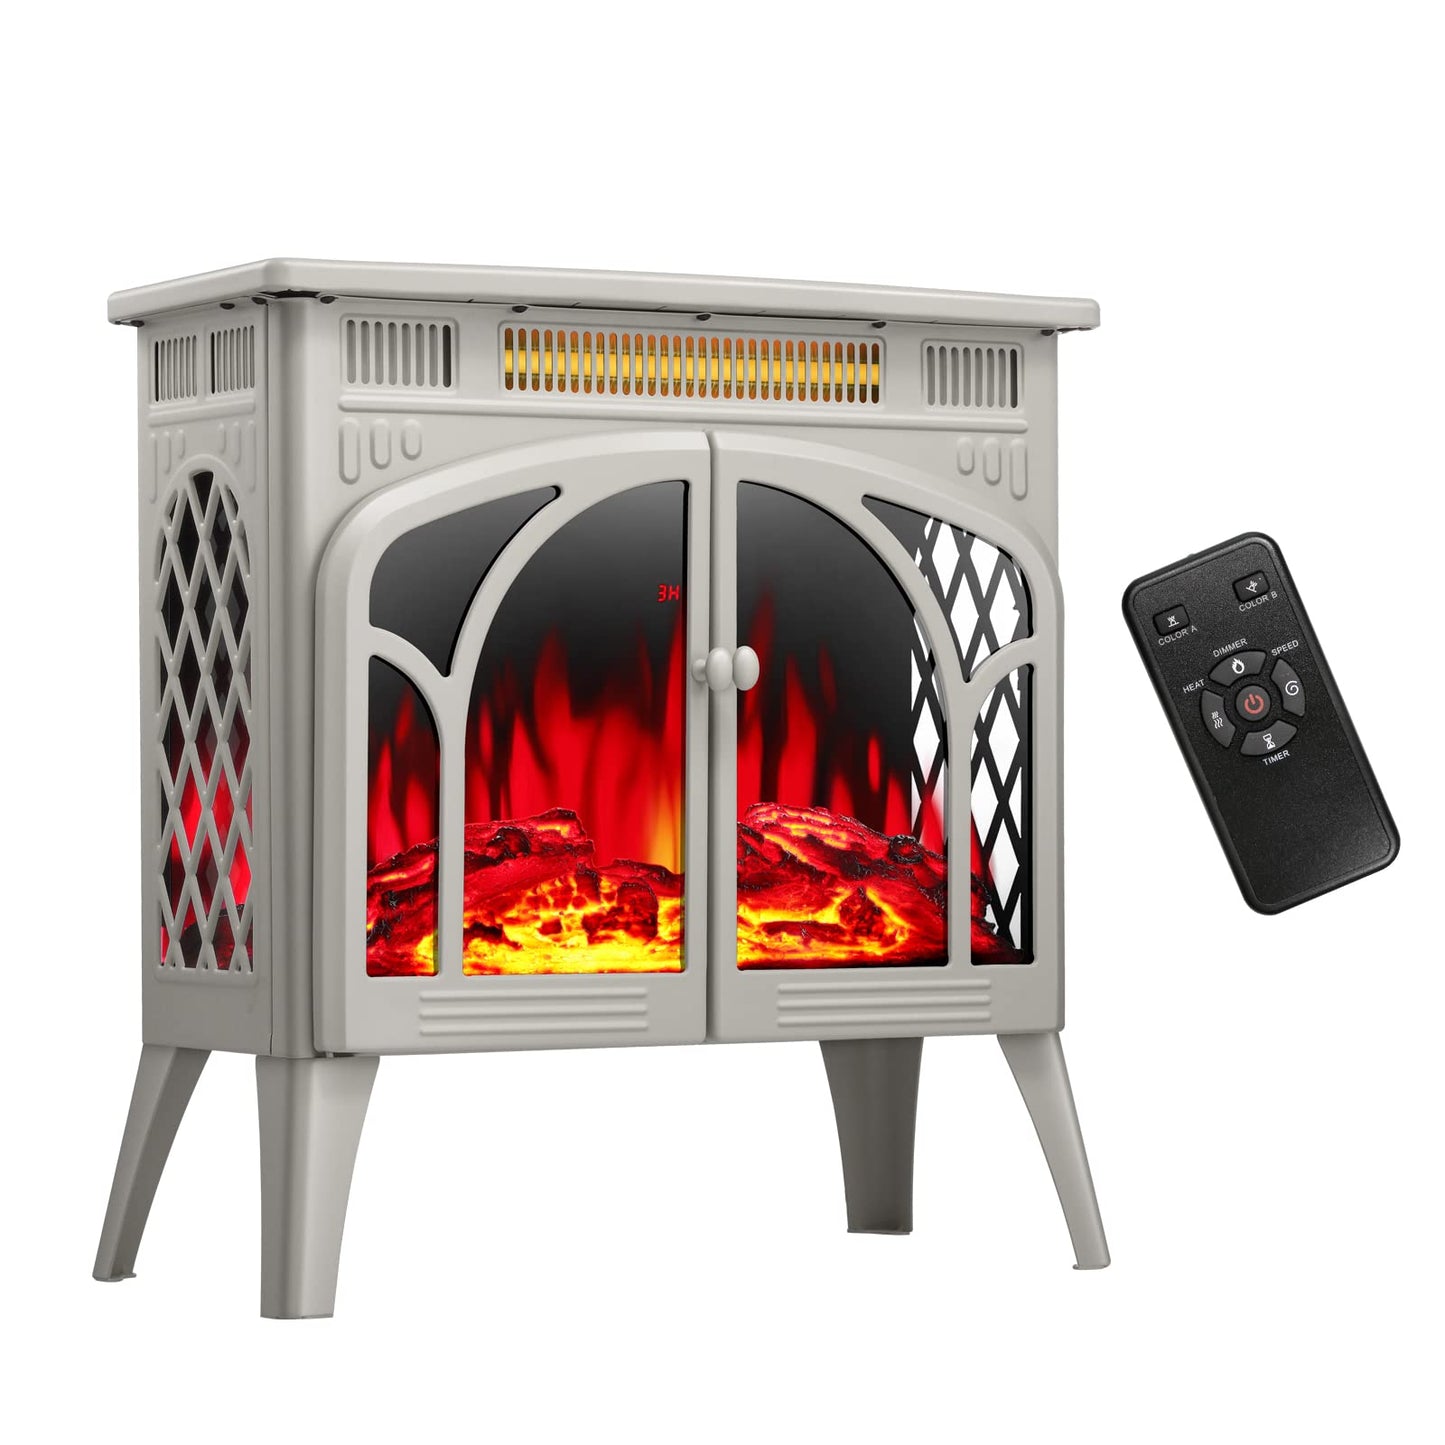 R.W.FLAME 24" Beige Electric Fireplace Stove Heater